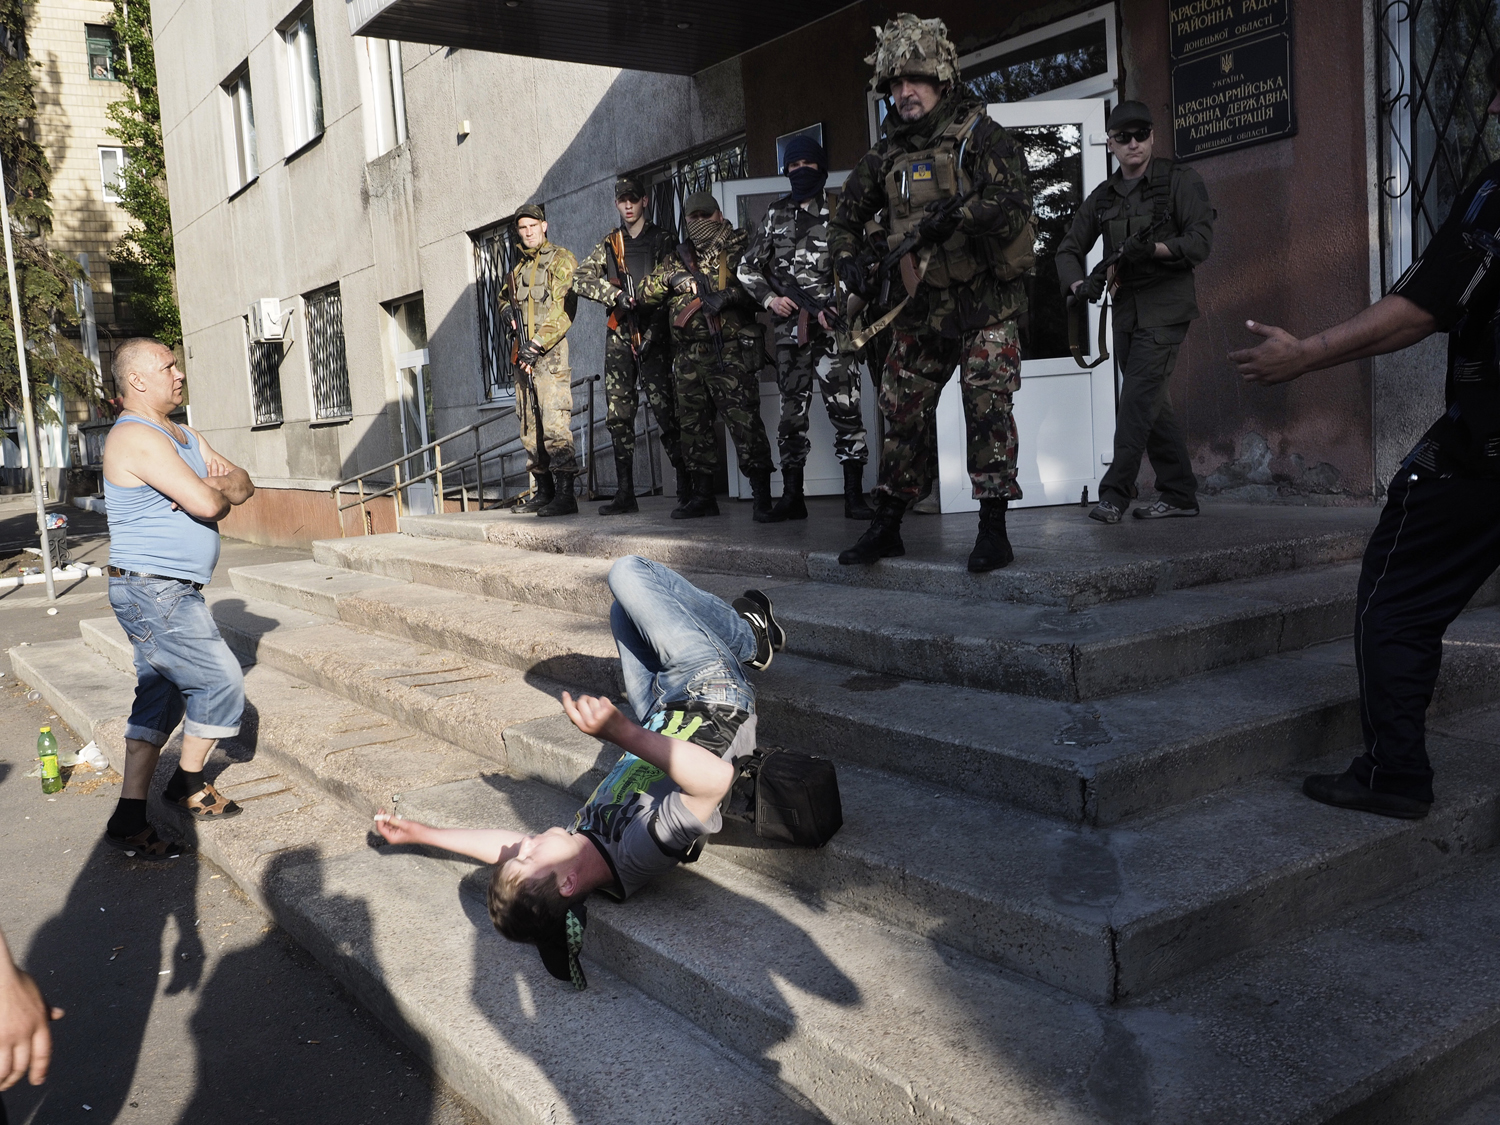 May 11, 2014. A man falls onto the stairs of the polling location, closed by Ukrainian national guards, after being hit in the head with the butt of a weapon.